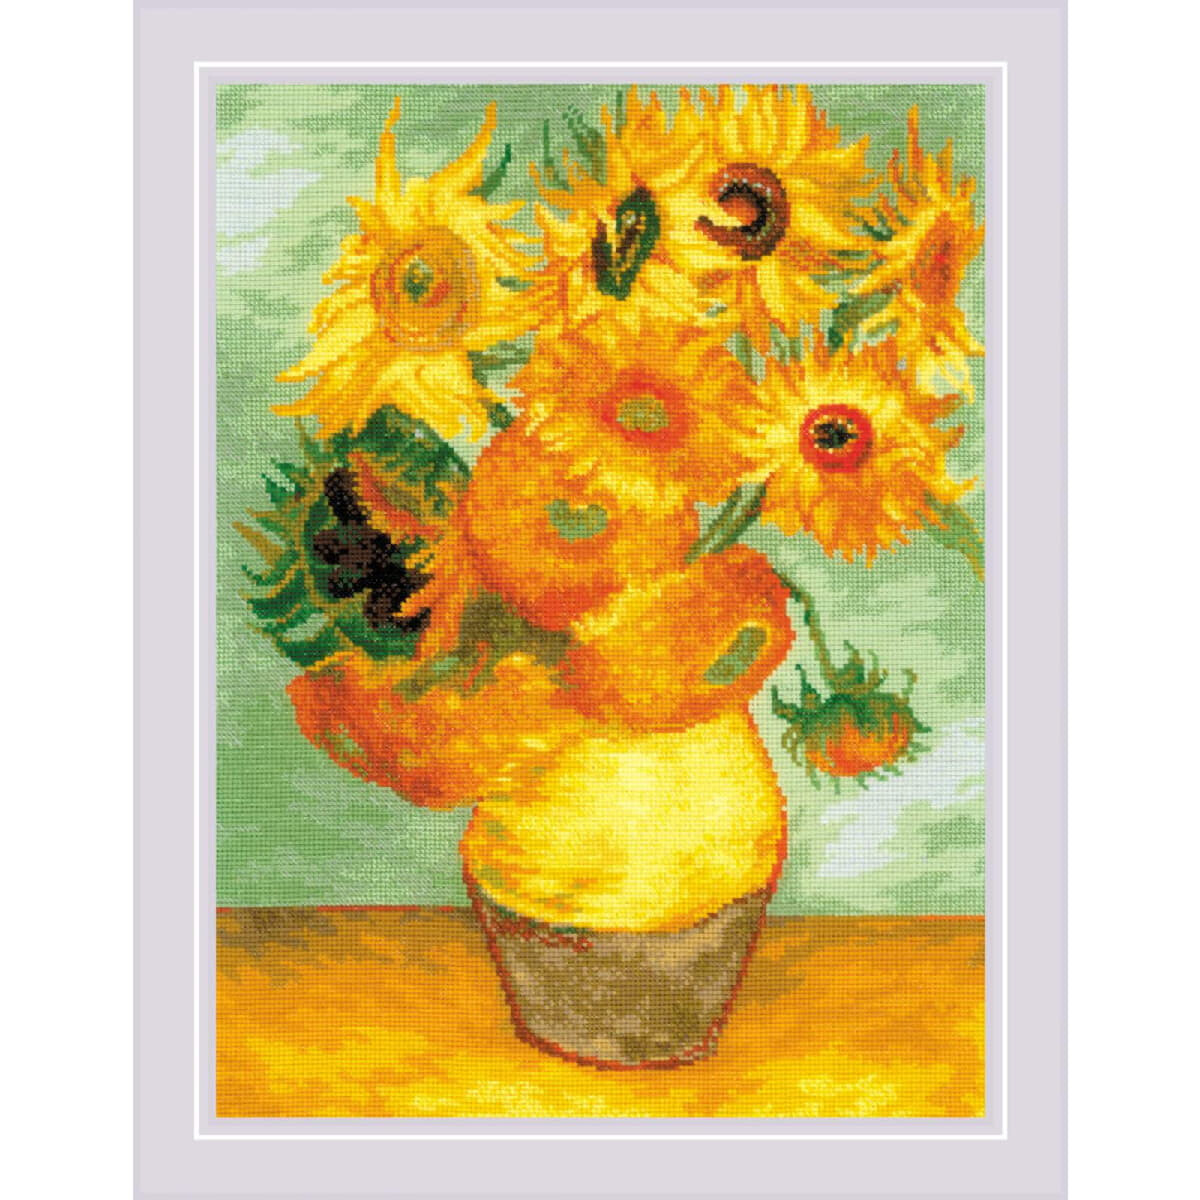 Riolis counted cross stitch kit "Sunflowers after...